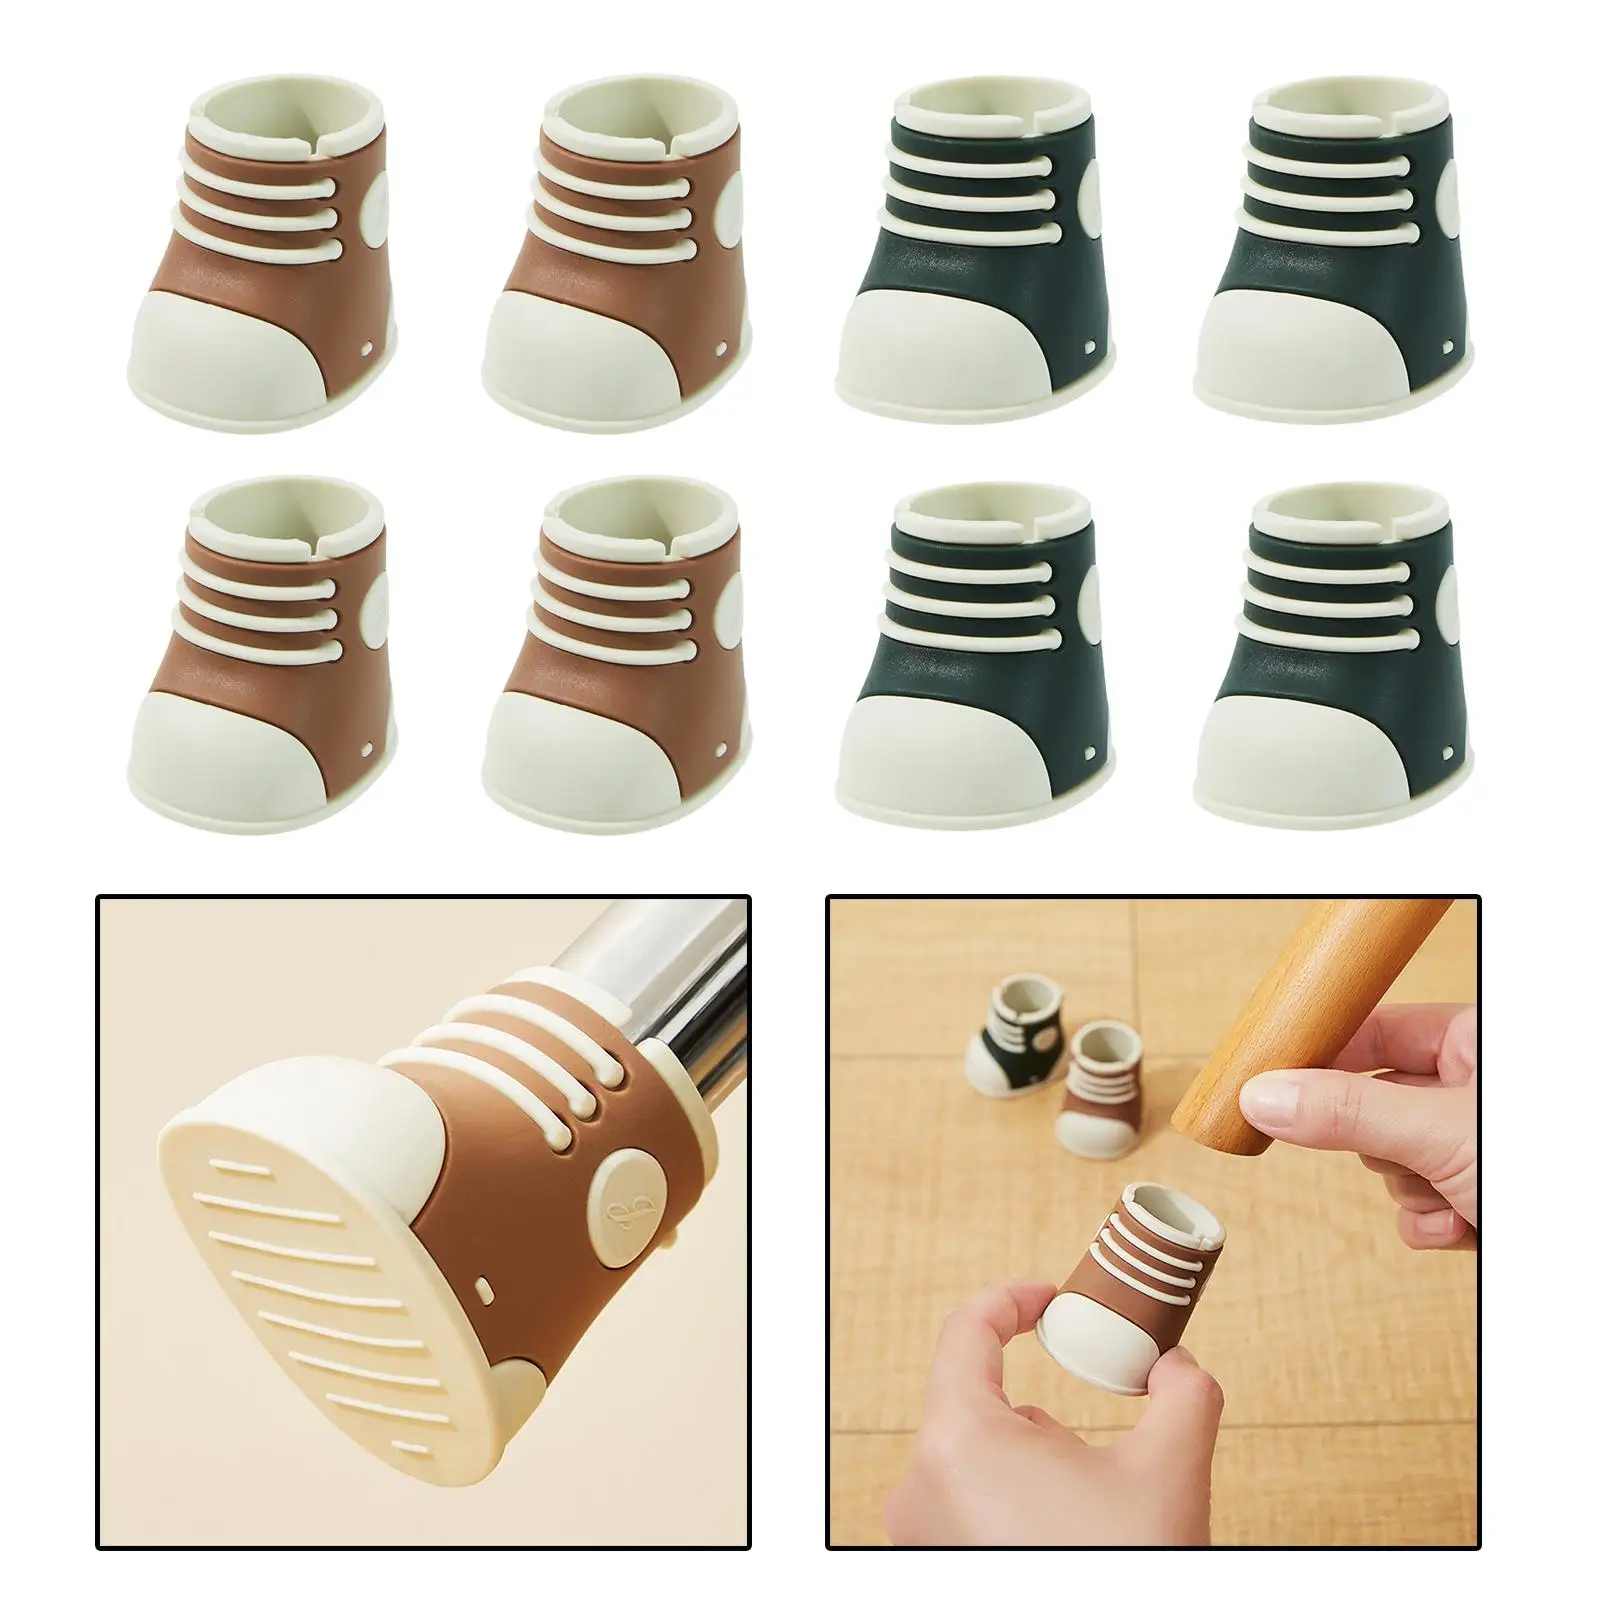 4Pcs Chair Leg Caps Covers Furniture Sliders Shoe Shaped Silicone Chair Leg Floor Protectors for Table Office Chair Couch